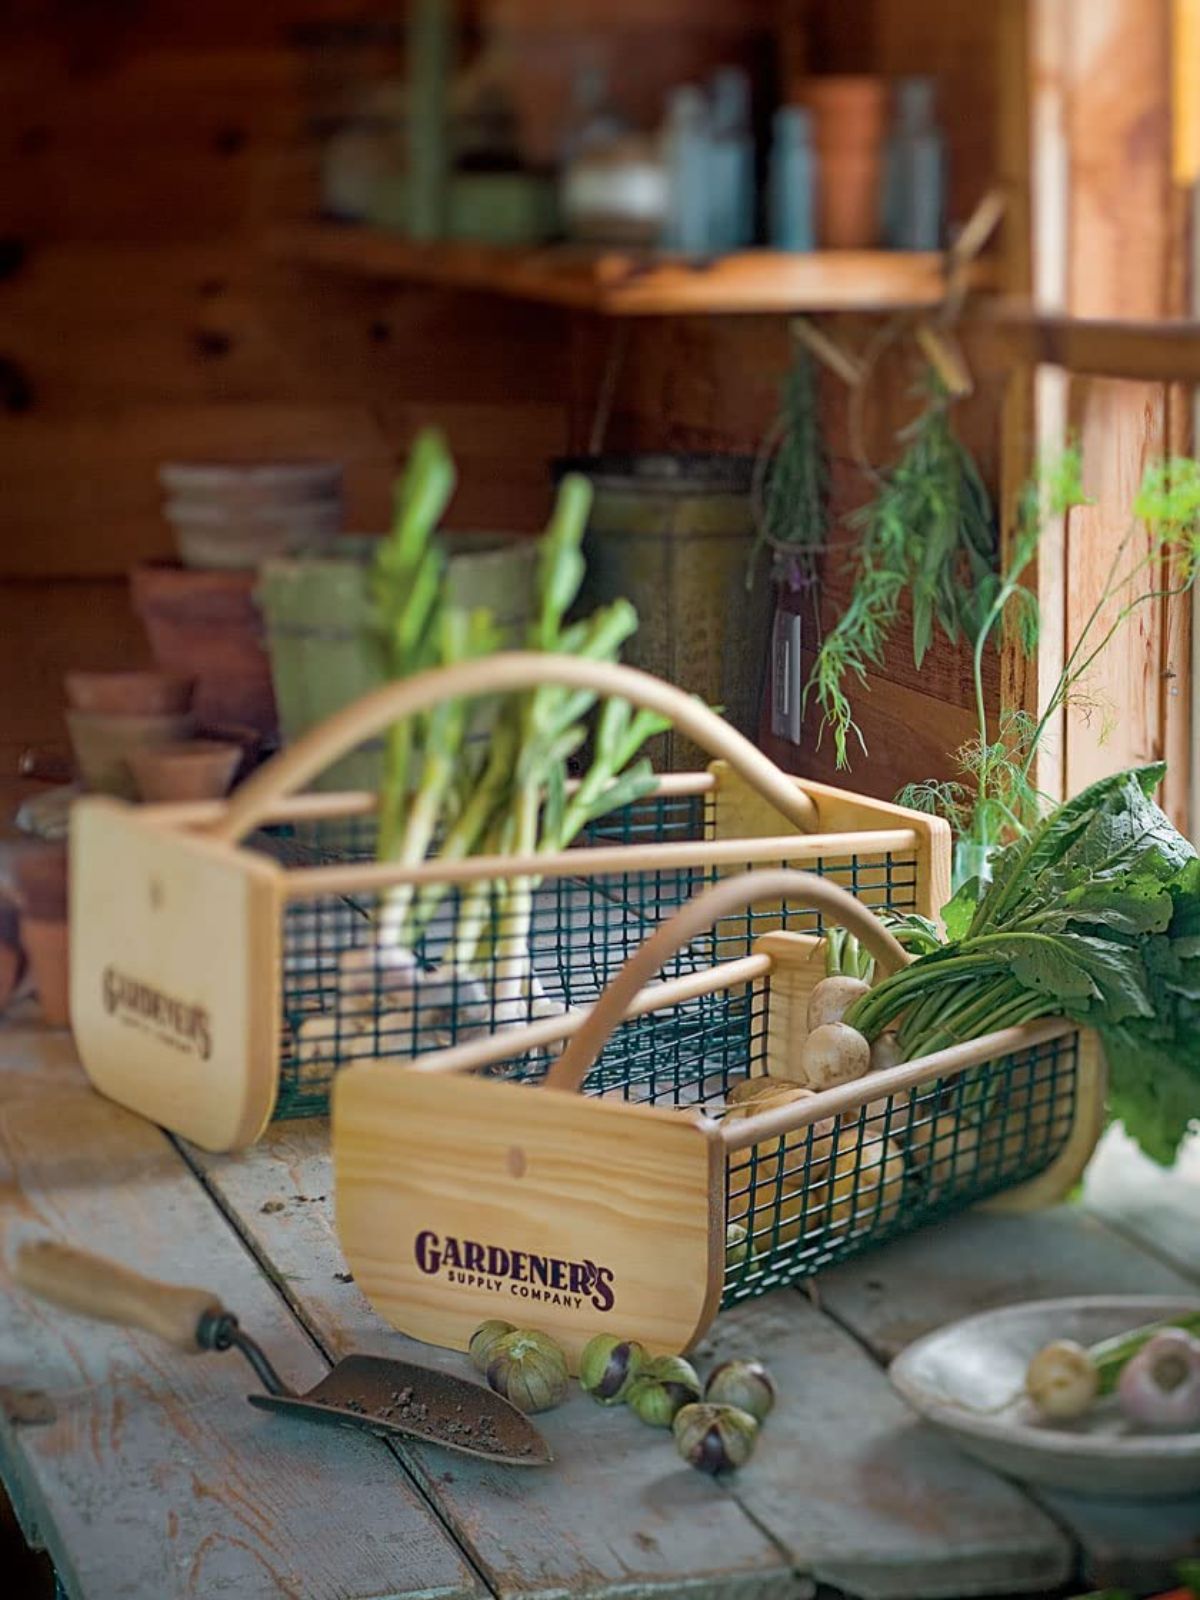 A wire mesh garden basket to harvest and clean vegetables and fruit